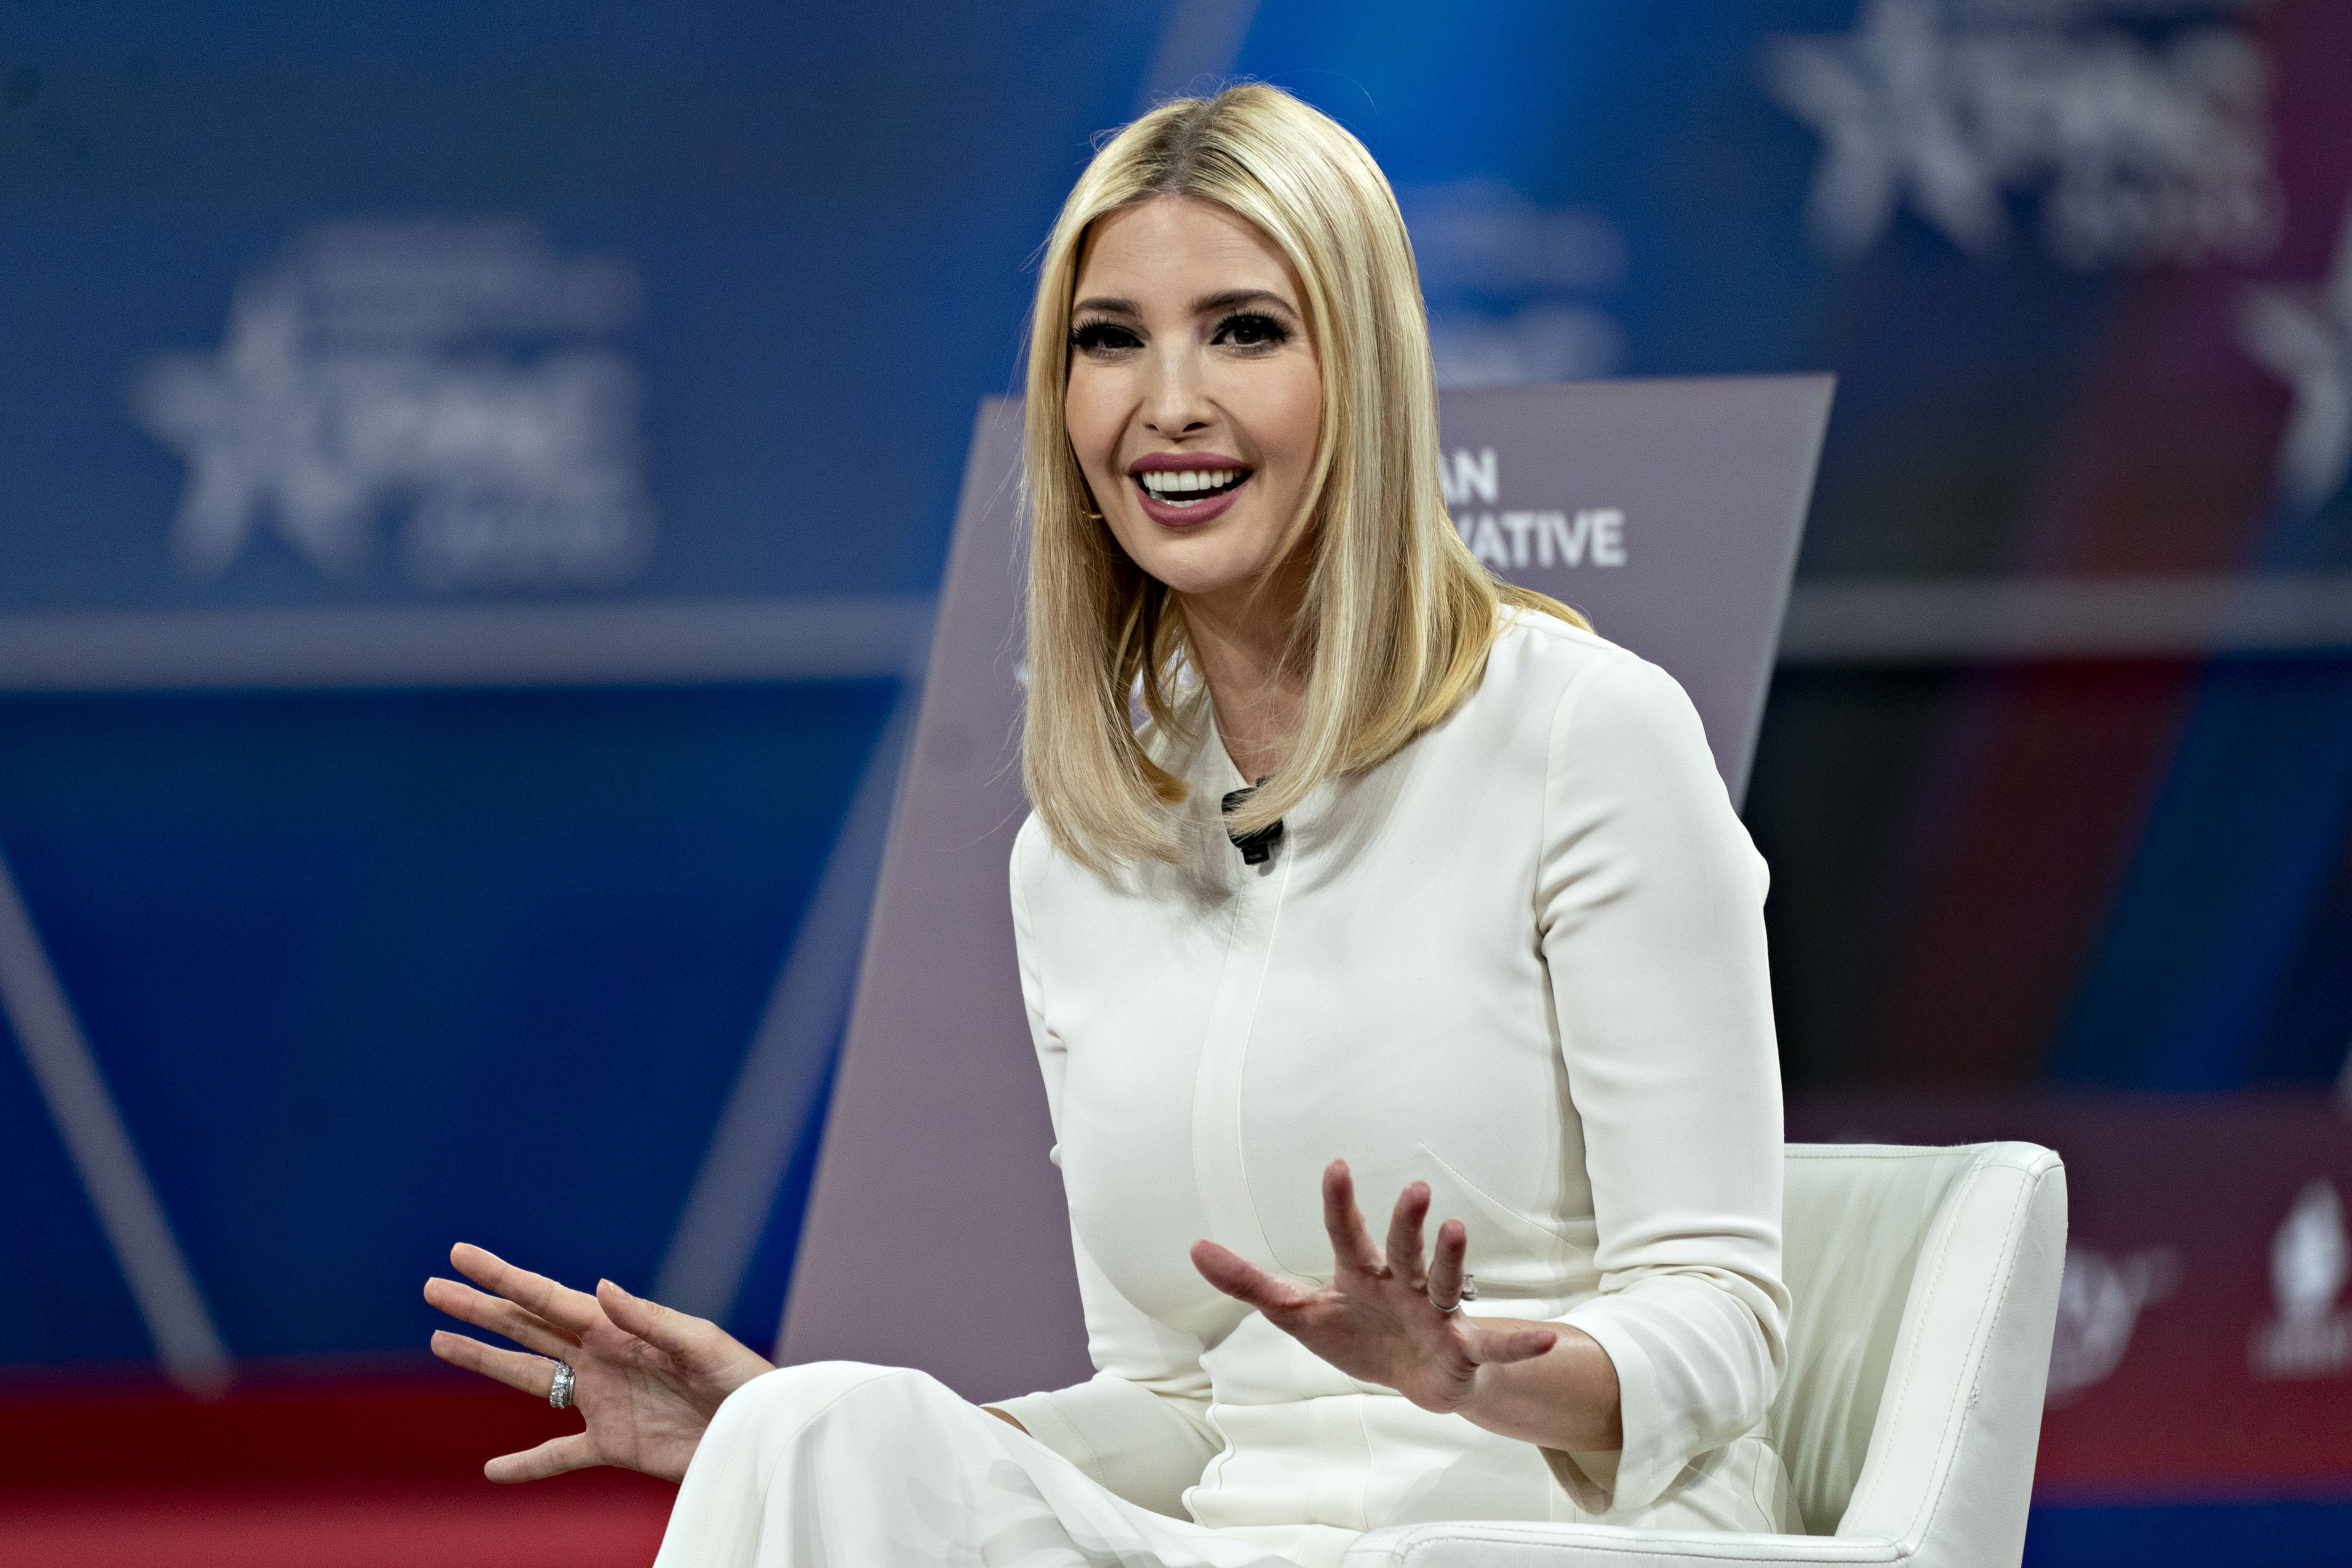 Ivanka Trump speaks during the Conservative Political Action Conference on Friday, Feb. 28, 2020. | Source: Getty Images